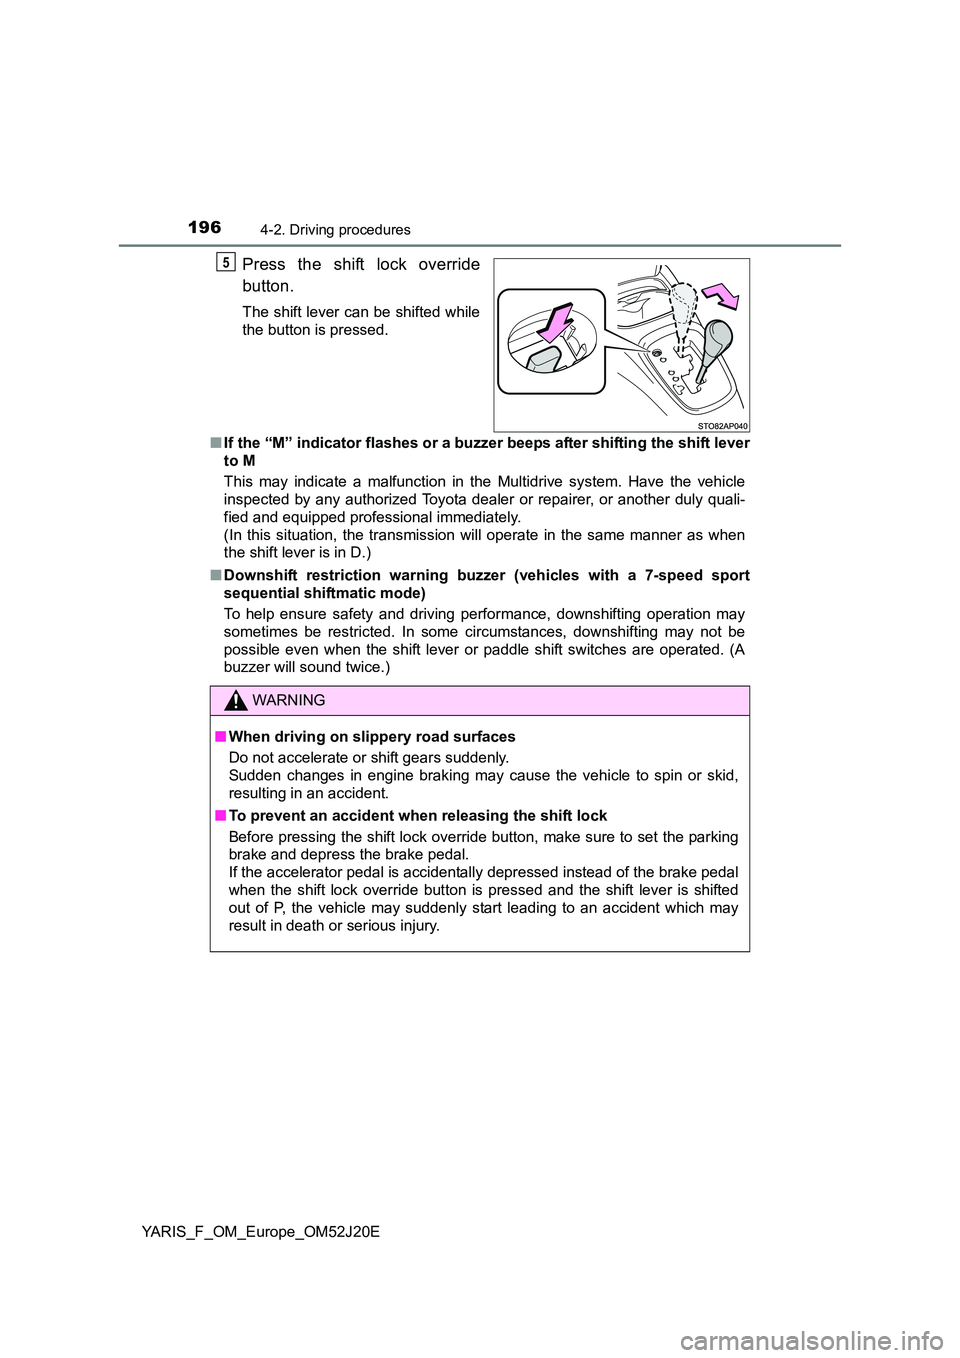 TOYOTA YARIS 2017  Owners Manual 1964-2. Driving procedures
YARIS_F_OM_Europe_OM52J20E
Press the shift lock override 
button.
The shift lever can be shifted while 
the button is pressed. 
■ If the “M” indicator flashes or a buz